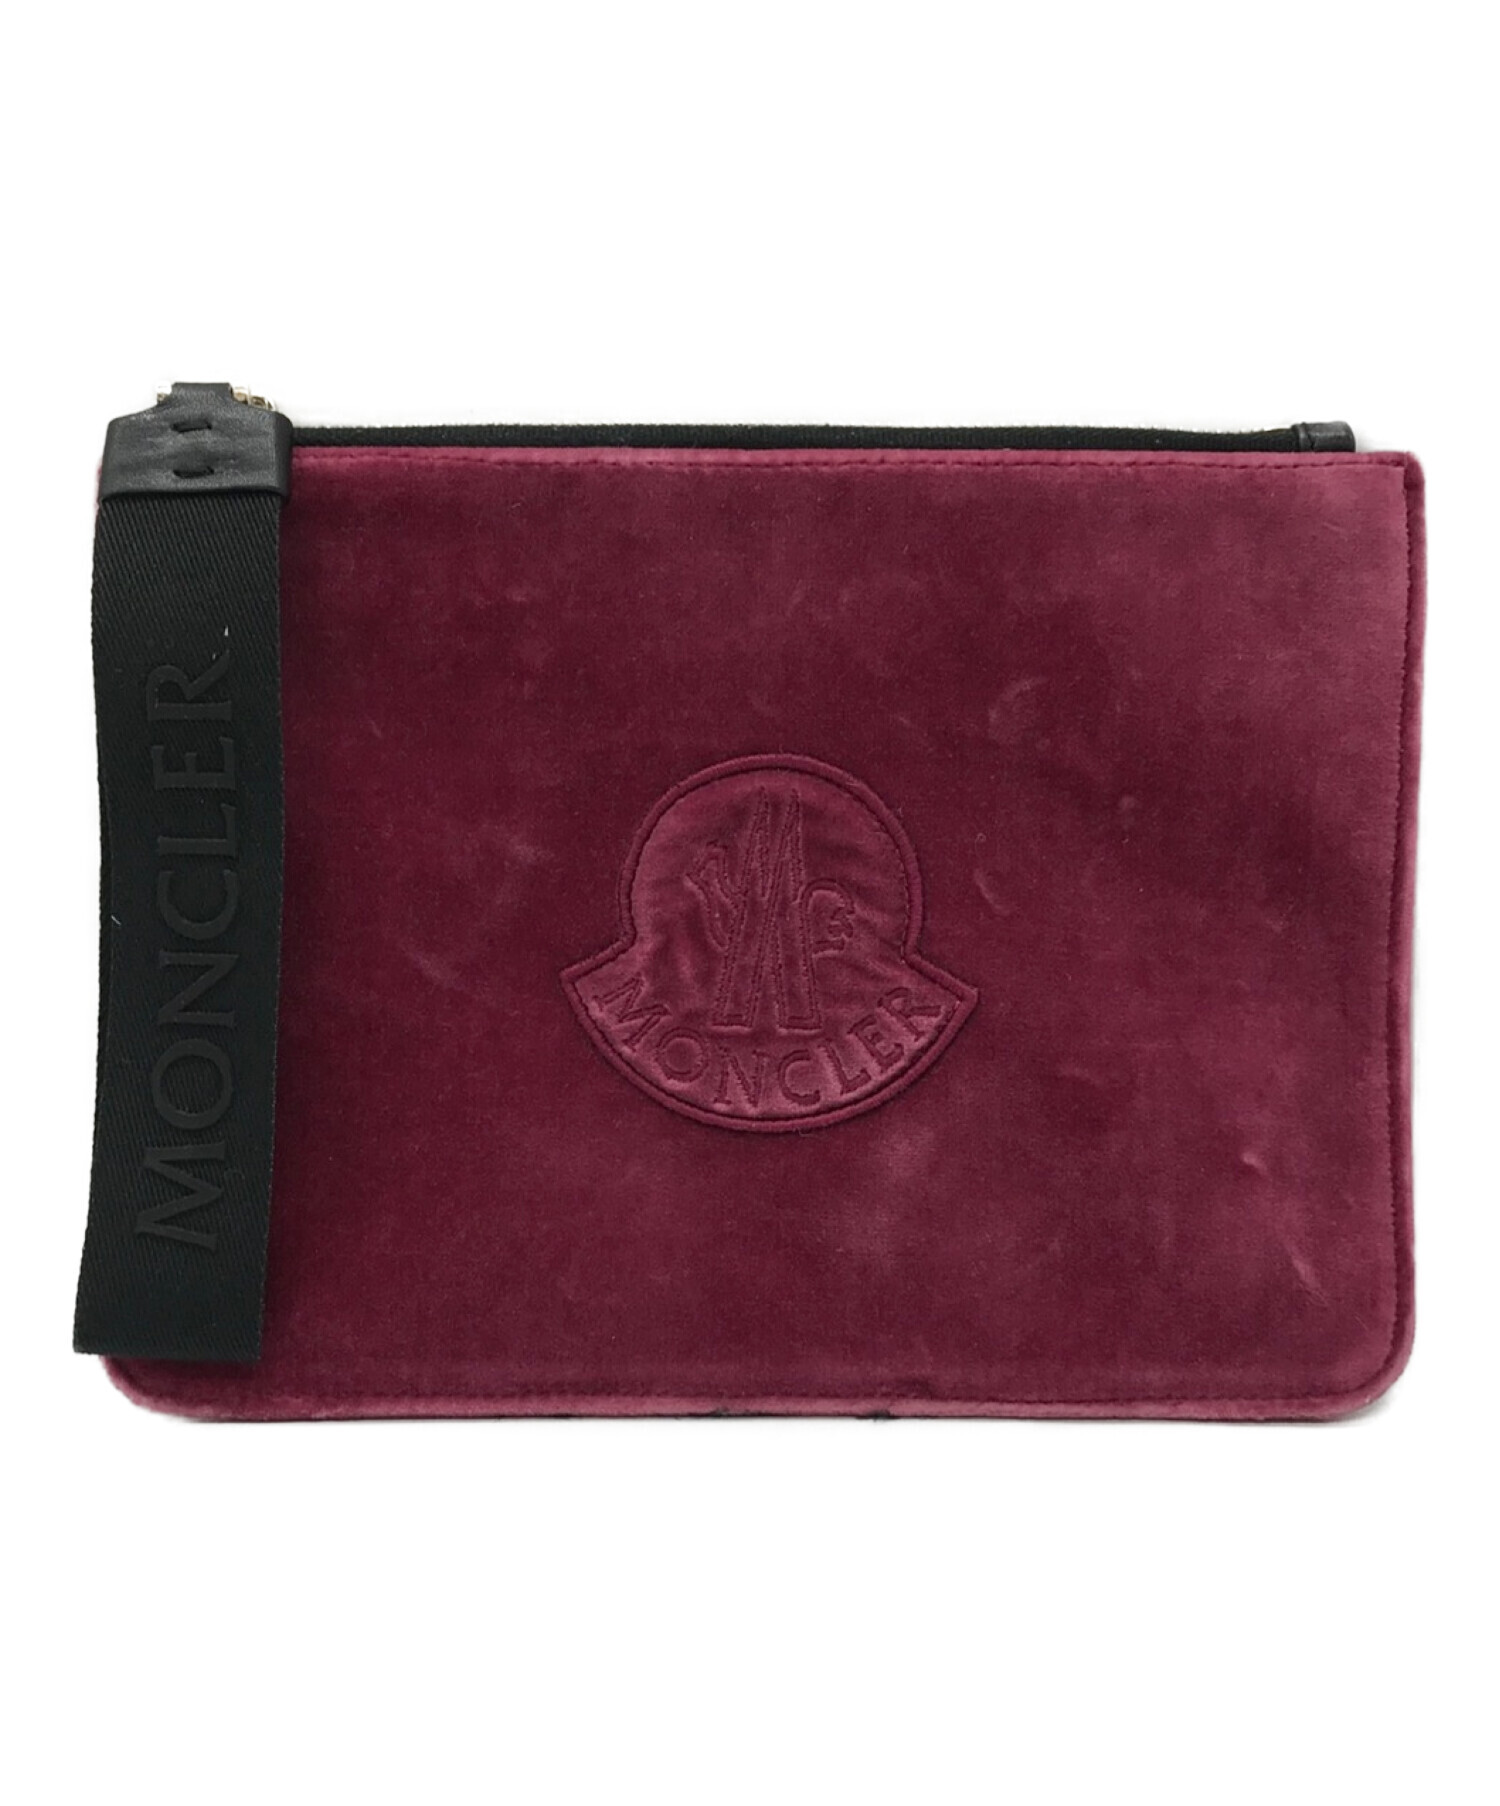 MONCLER (モンクレール) POUCH PM ベロアクラッチバッグ レッド